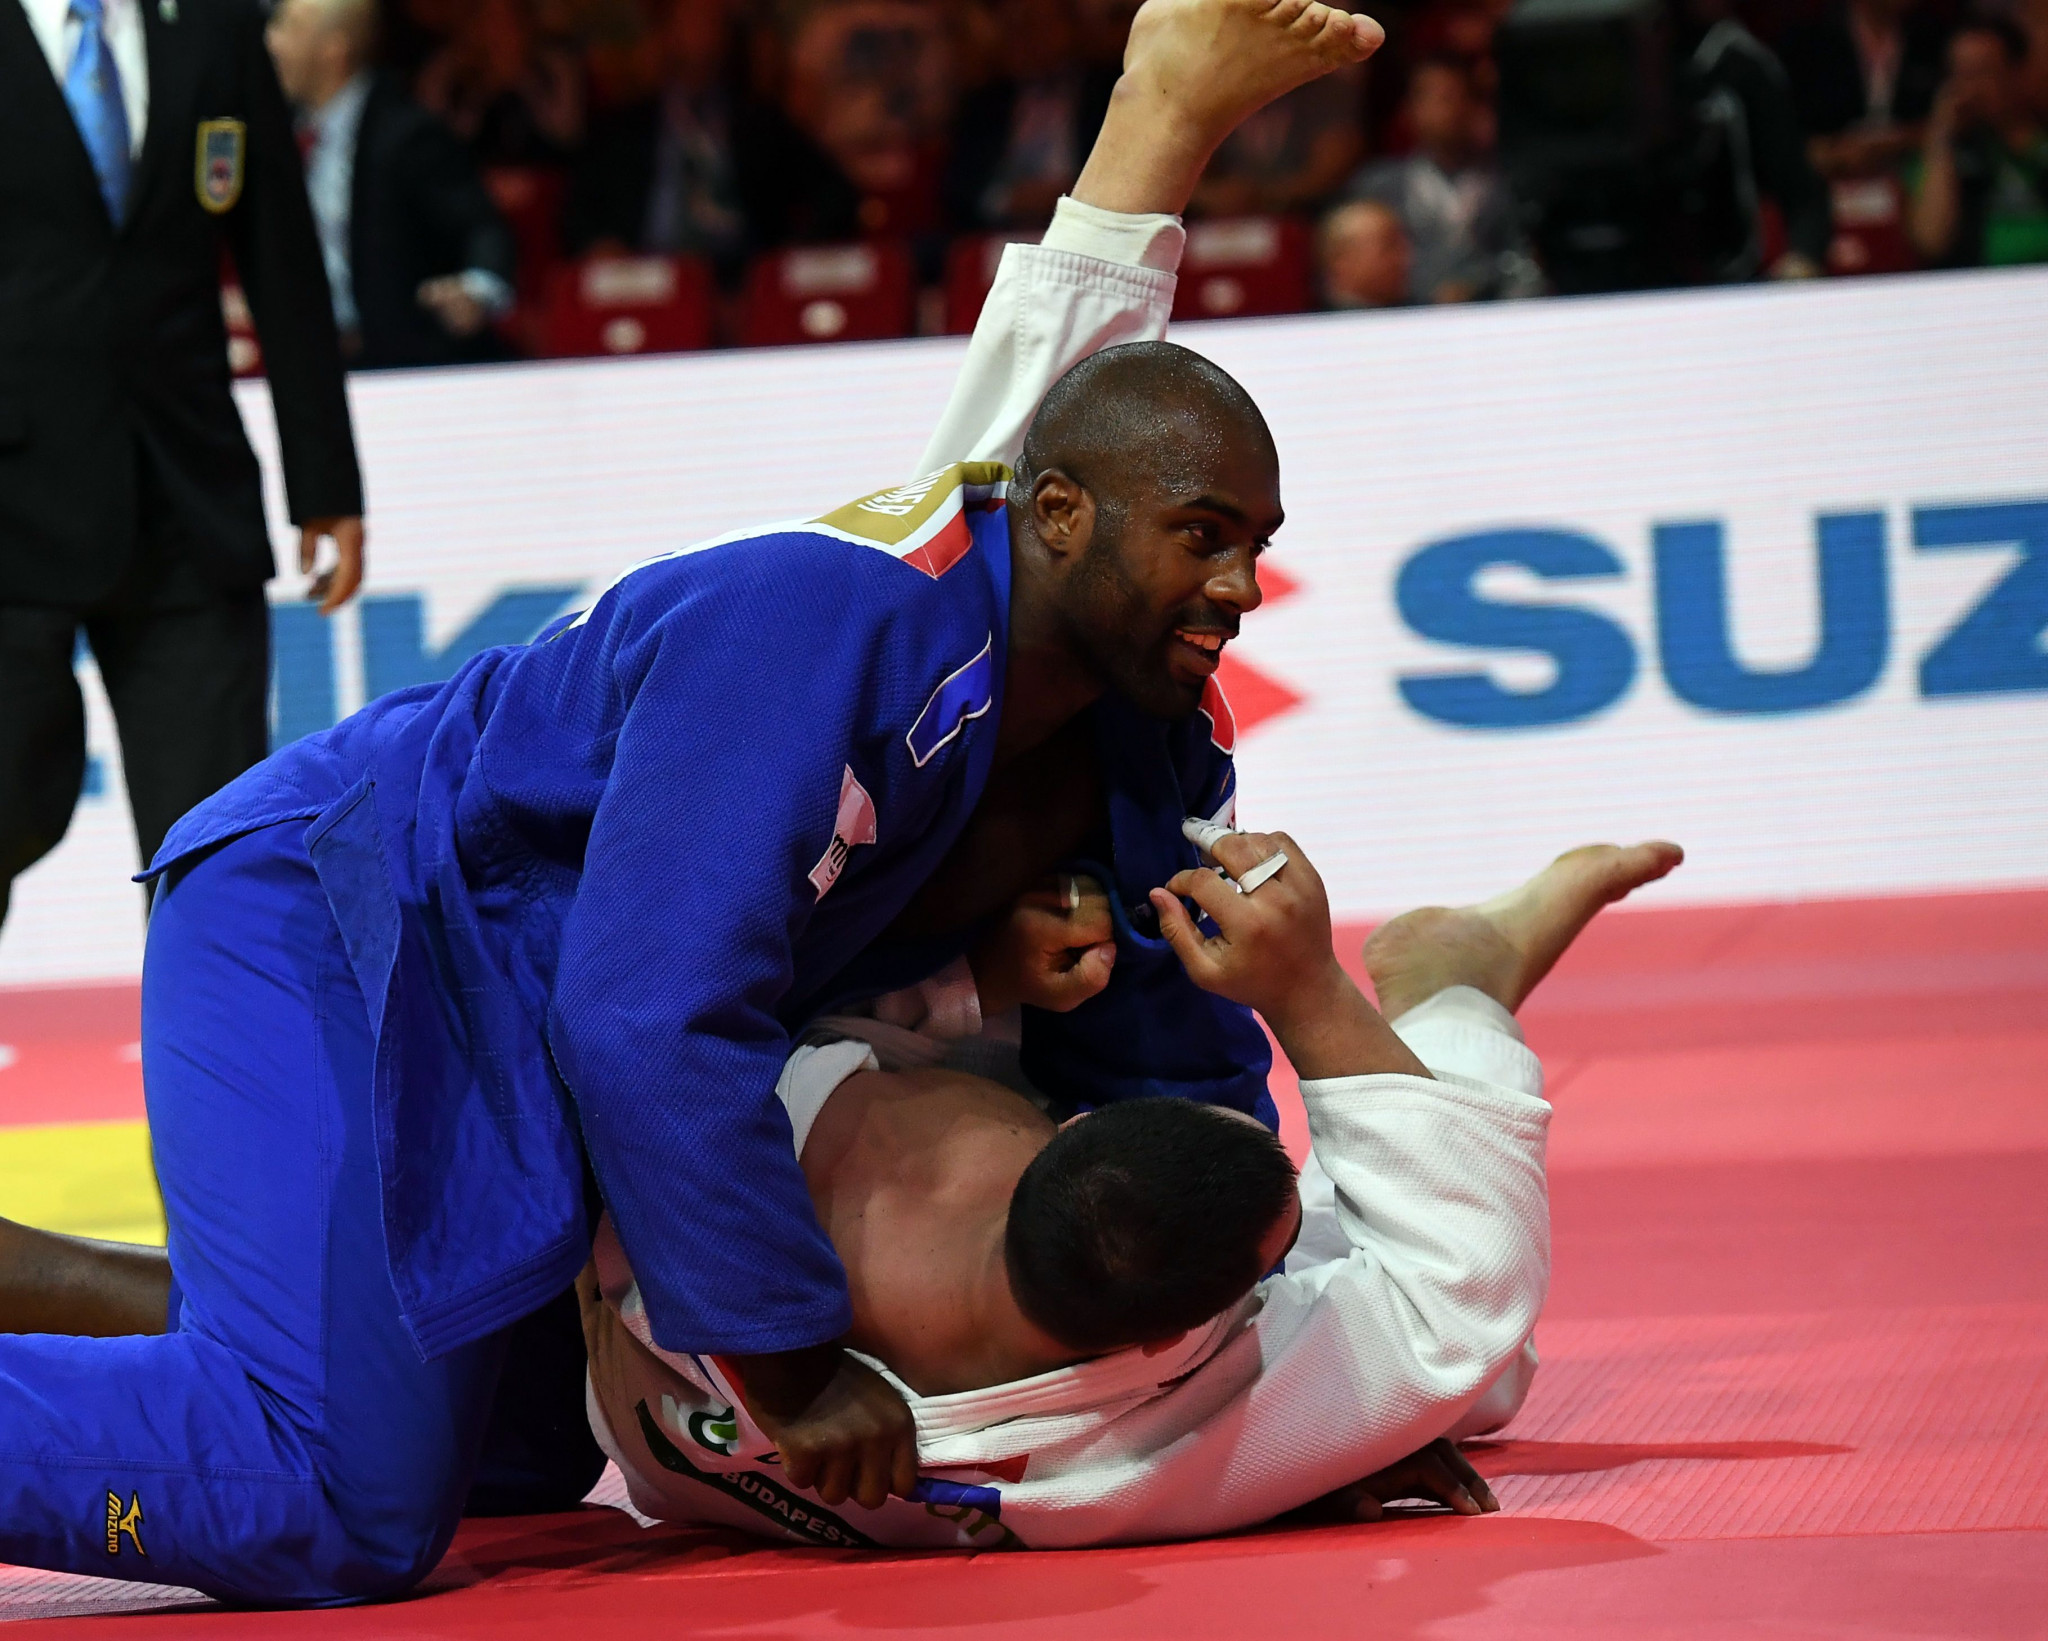 French star Teddy Riner will compete in his first event since November 2017 this weekend, when the IJF Grand Prix season continues in Montreal ©Getty Images